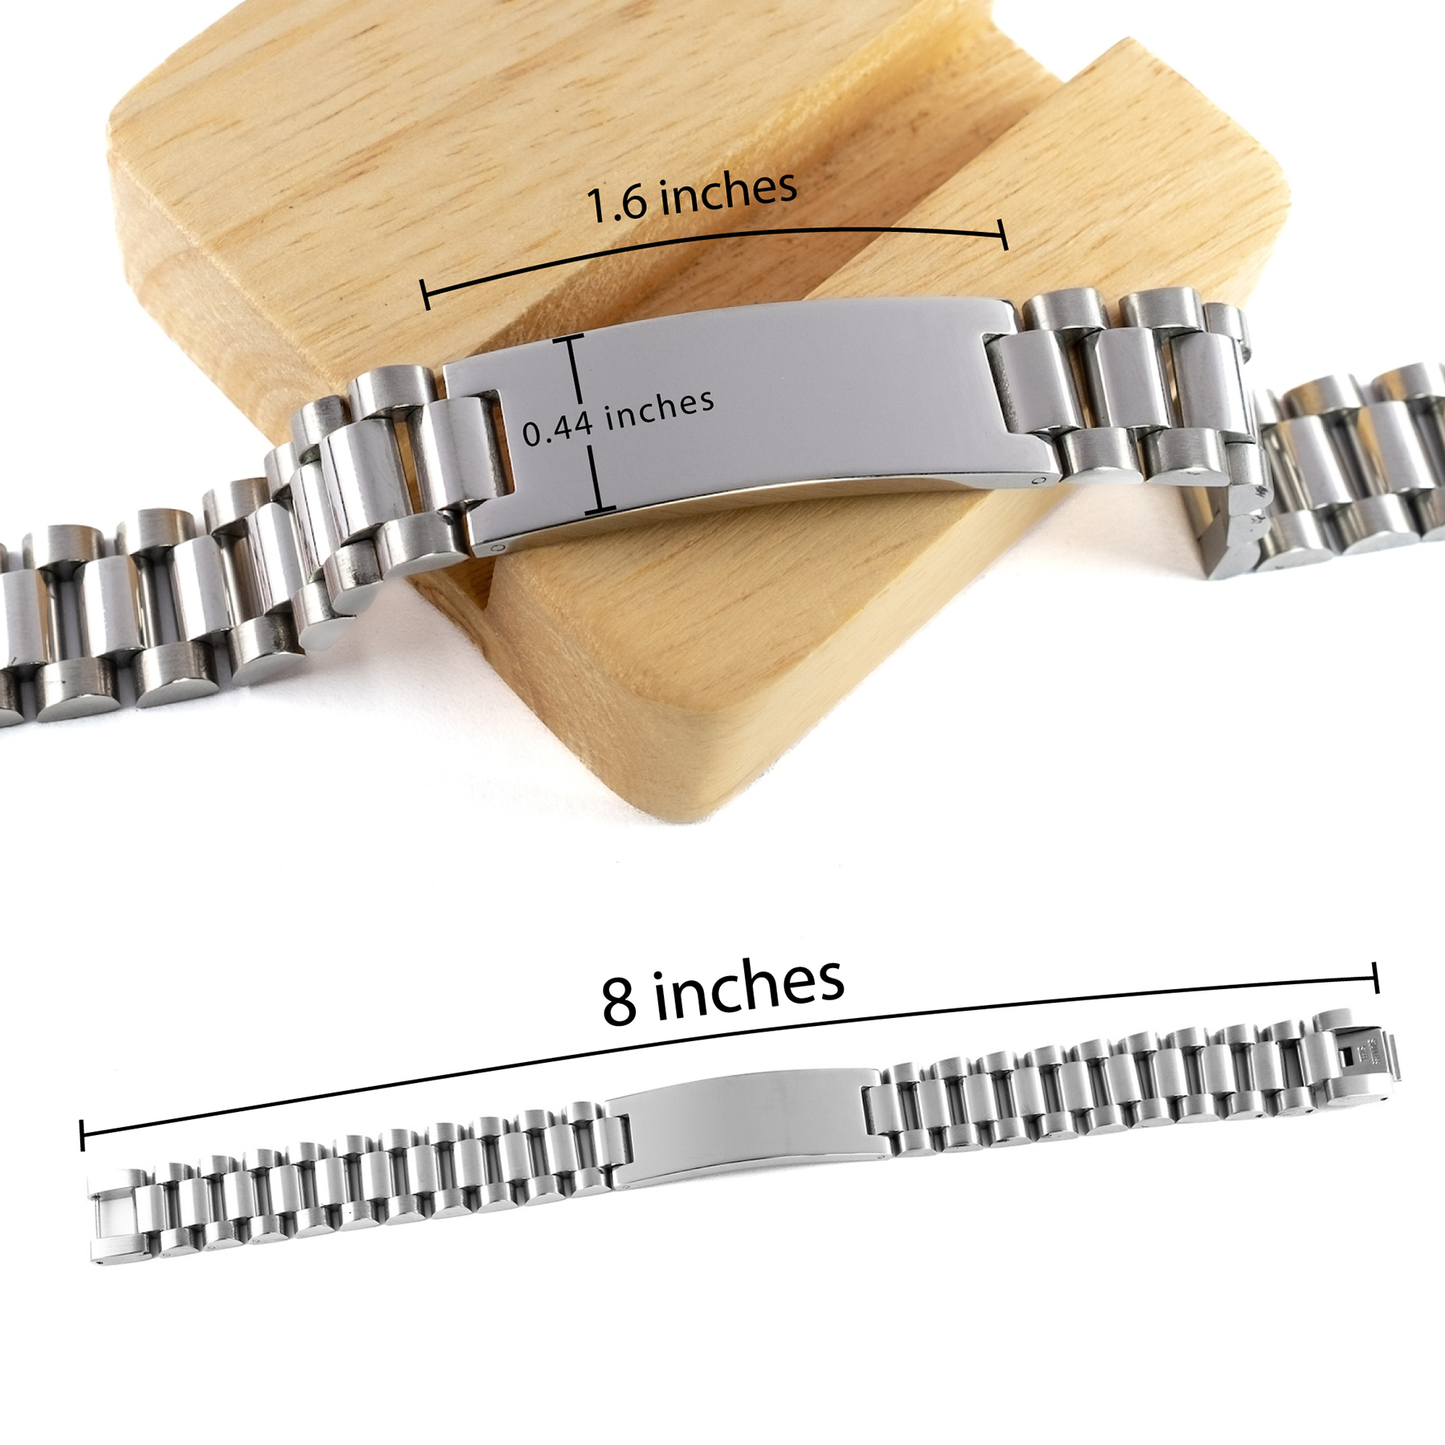 To My Unbiological Mom Thank You Gifts, You are appreciated more than you know, Appreciation Ladder Stainless Steel Bracelet for Unbiological Mom, Birthday Unique Gifts for Unbiological Mom